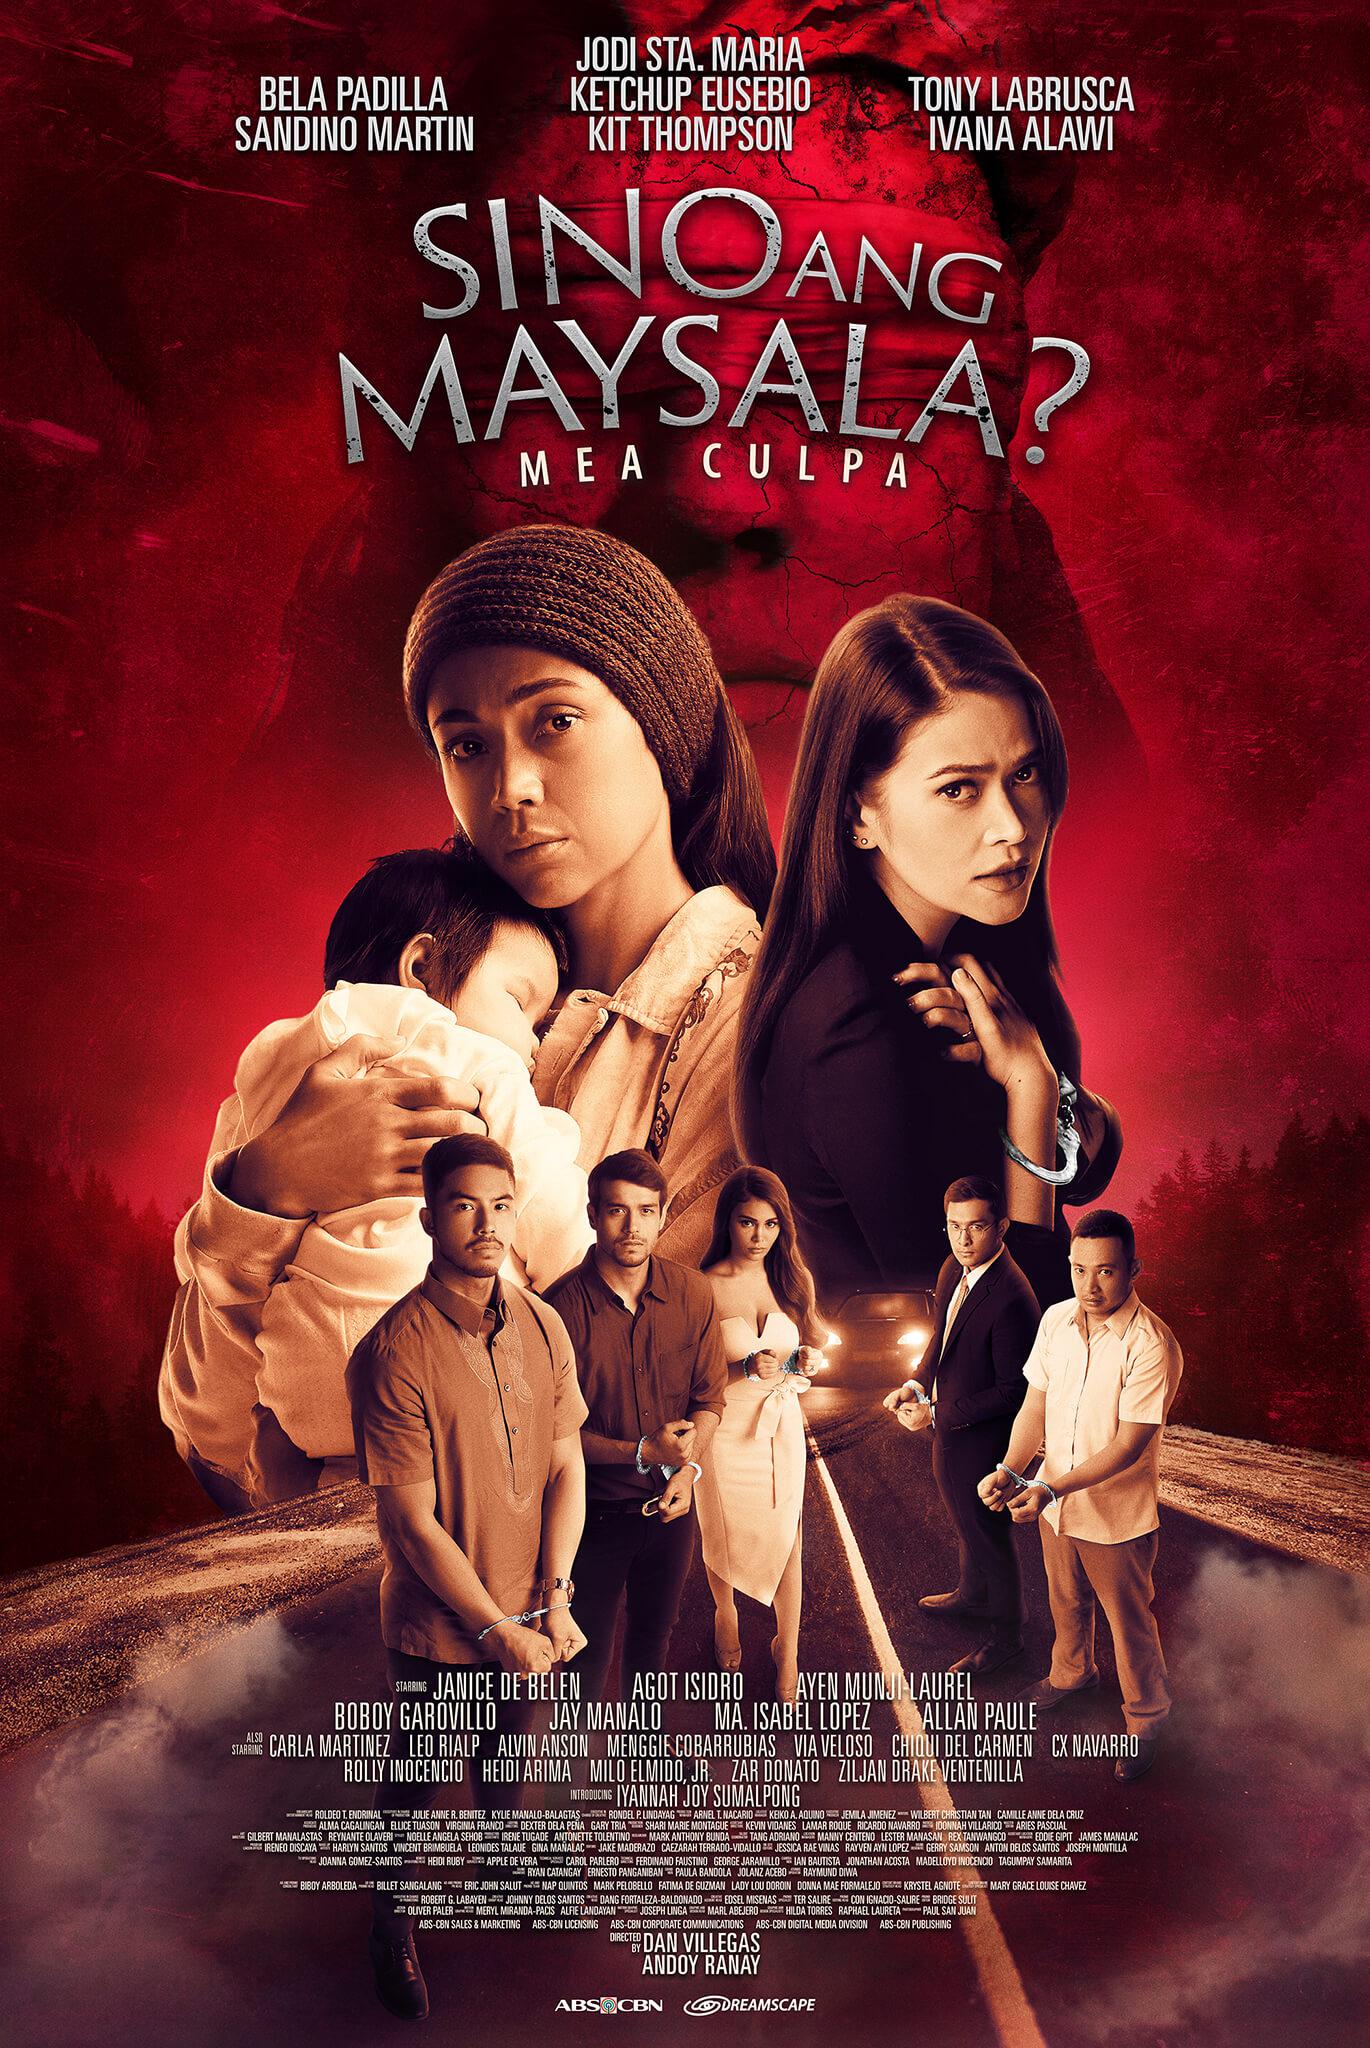 TV ratings for SINO ANG MAYSALA?Mea Culpa in Brazil. ABS-CBN TV series